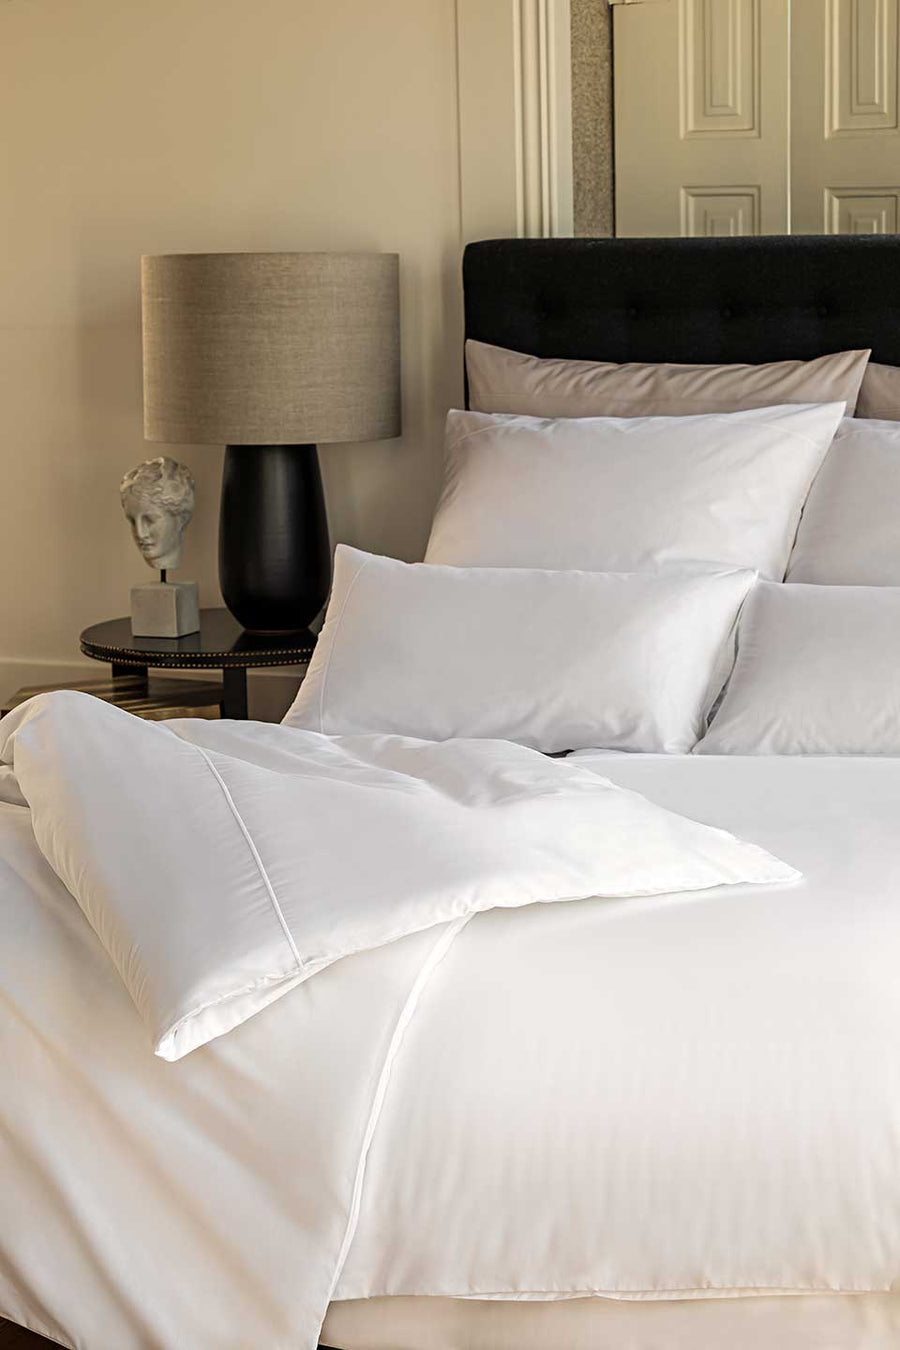 Bed with Egyptian Cotton™ Percale bedding next to an elegant bedside table.